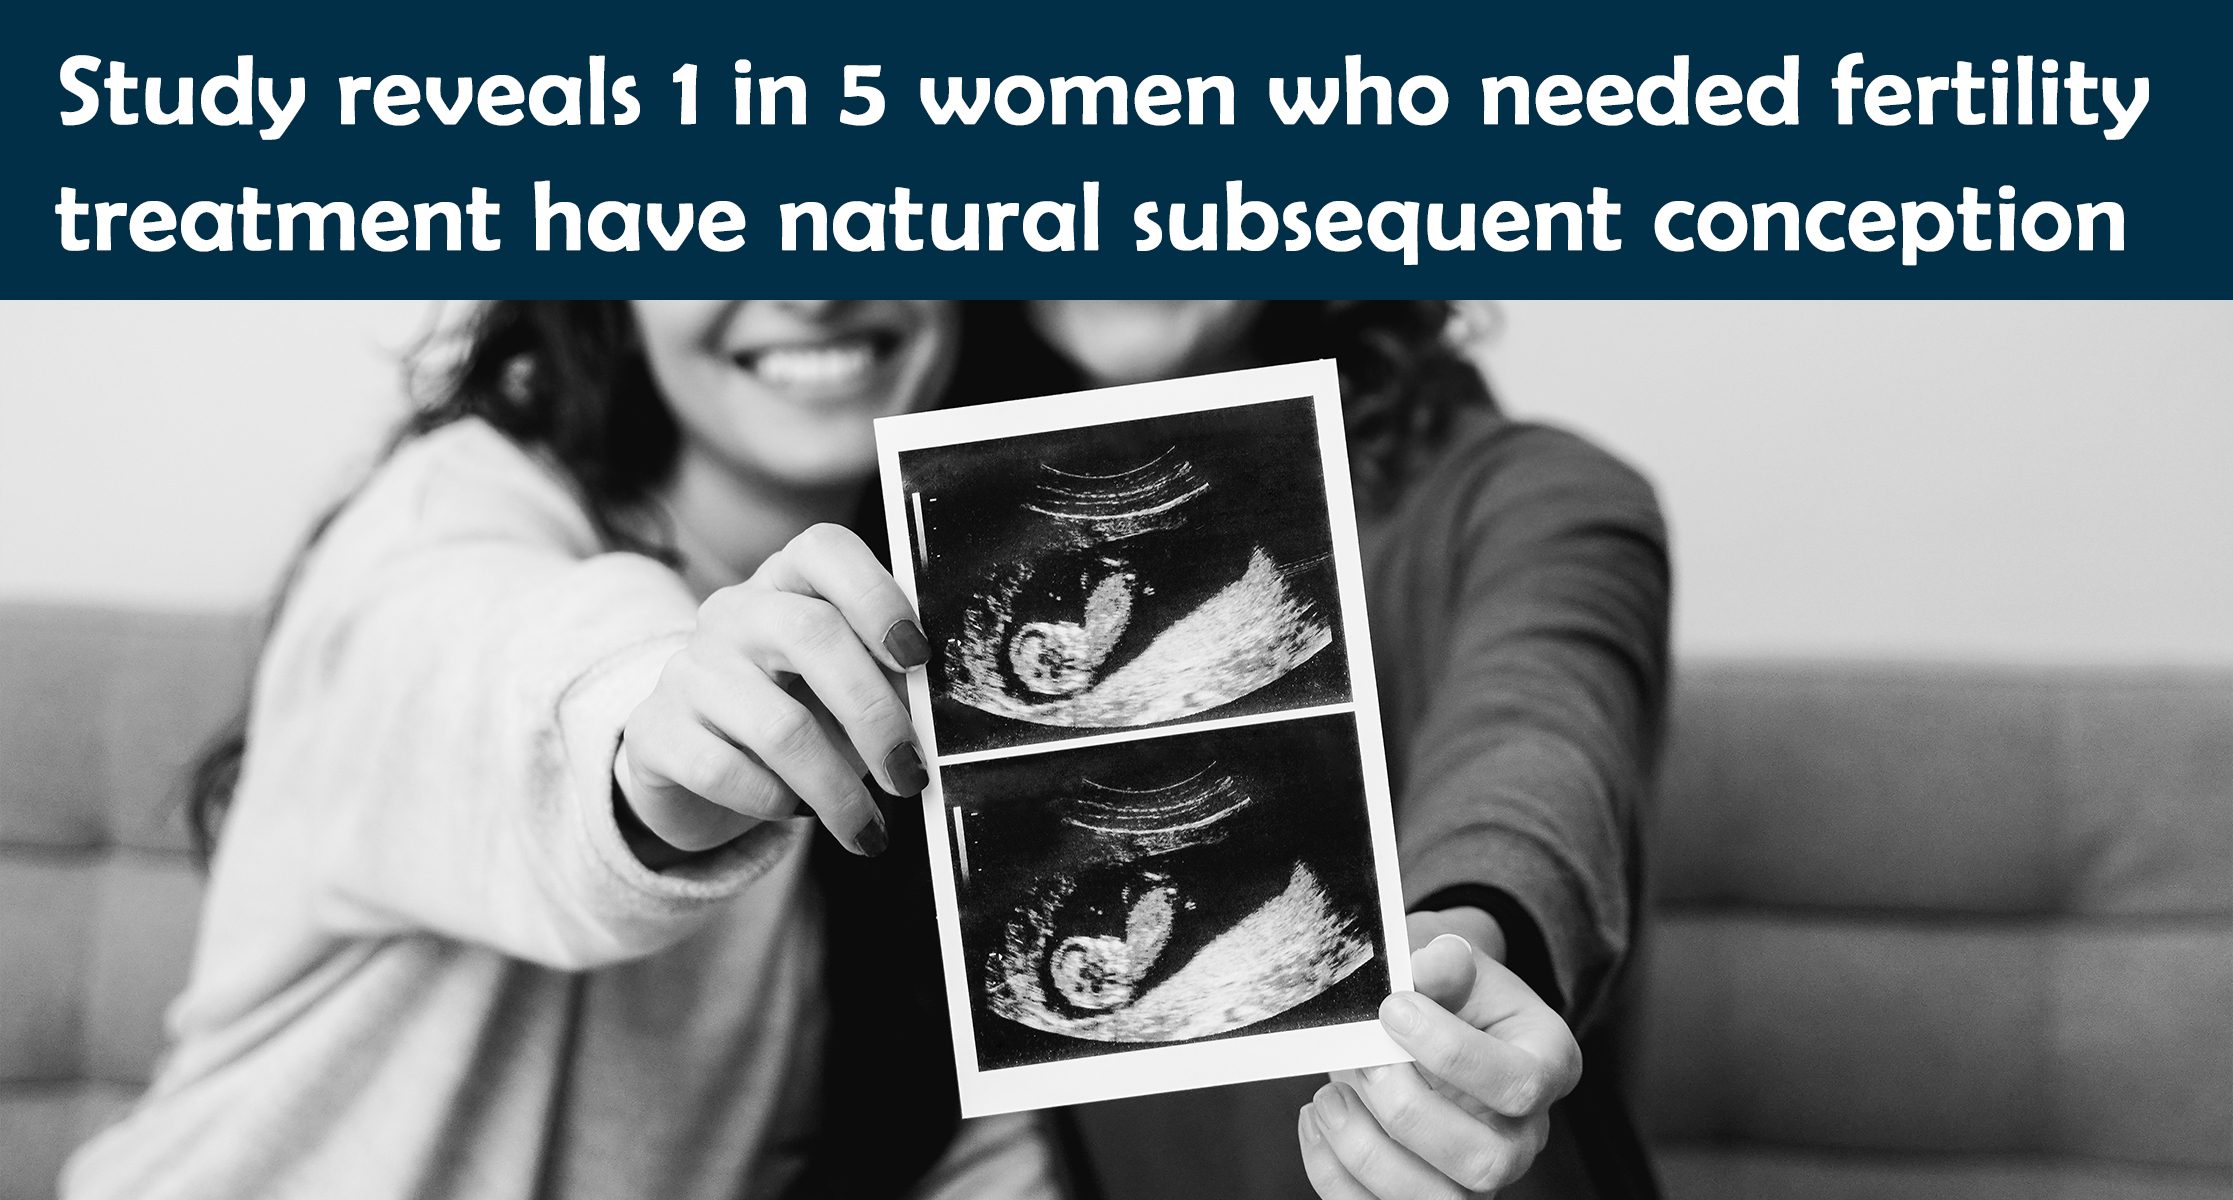 Study reveals 1 in 5 women who needed fertility treatment have natural subsequent conception